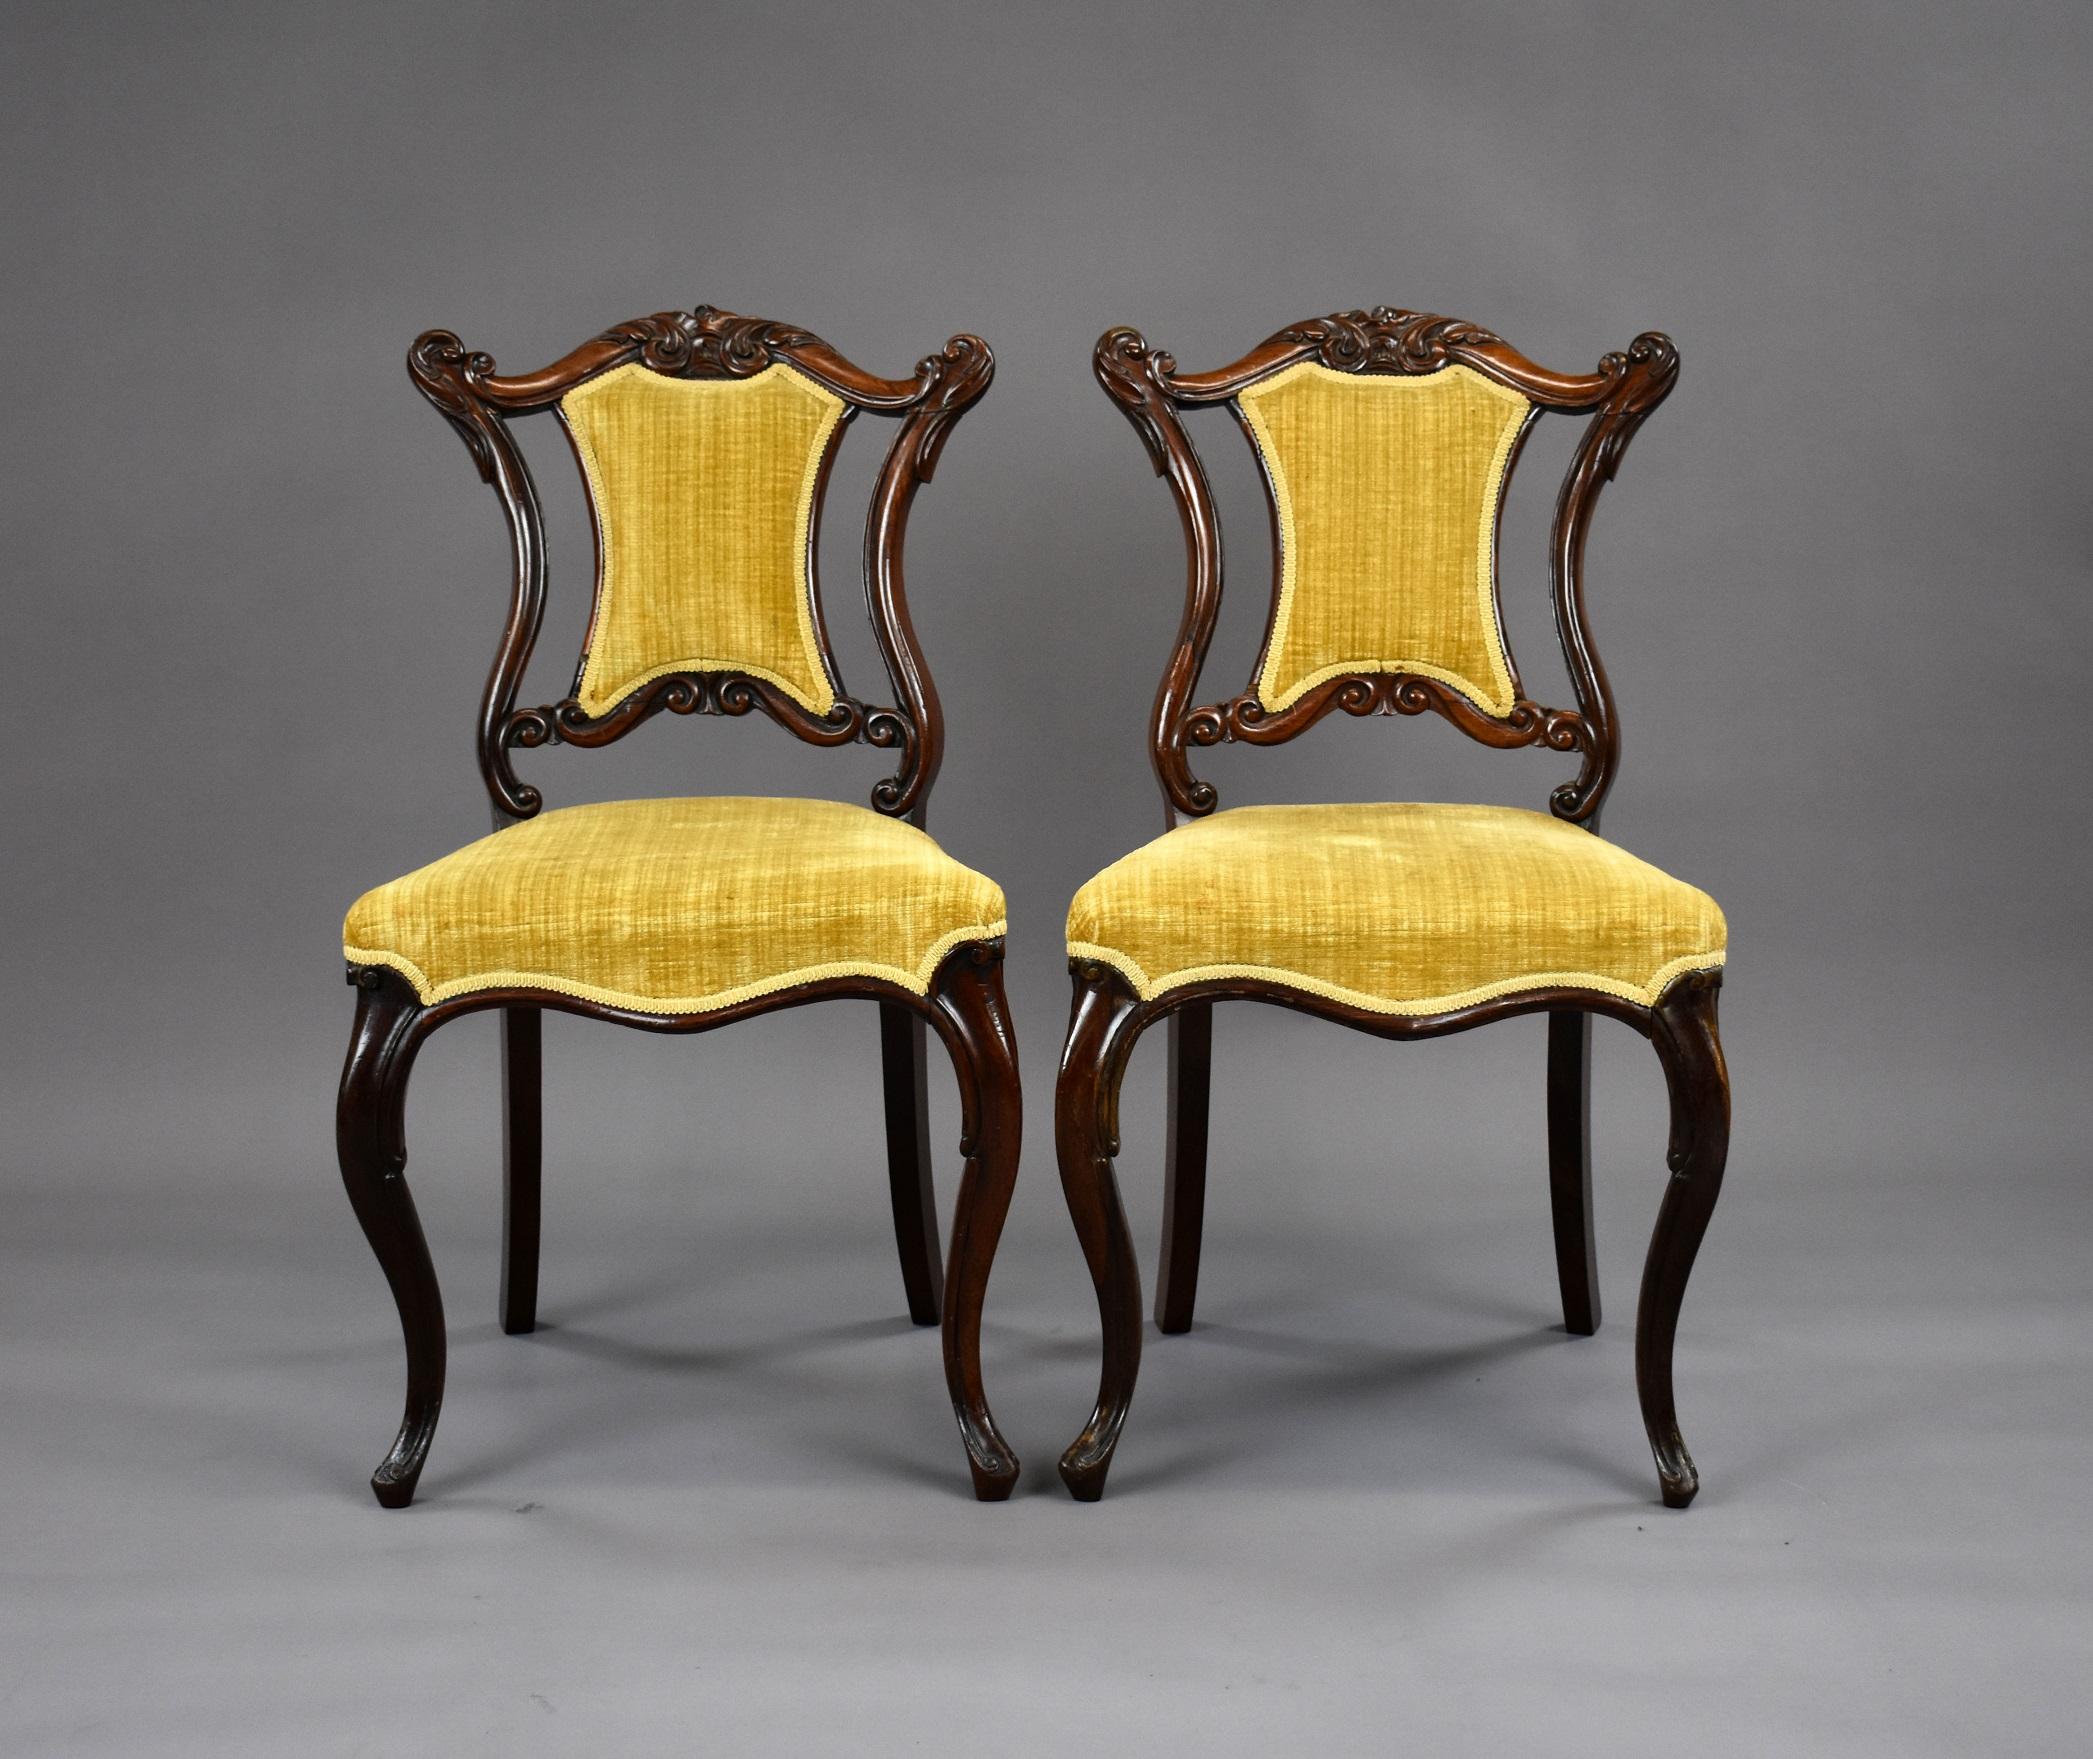 Pair of good quality Victorian rosewood upholstered chairs in good condition having nicely carved backs standing on cabriol legs.